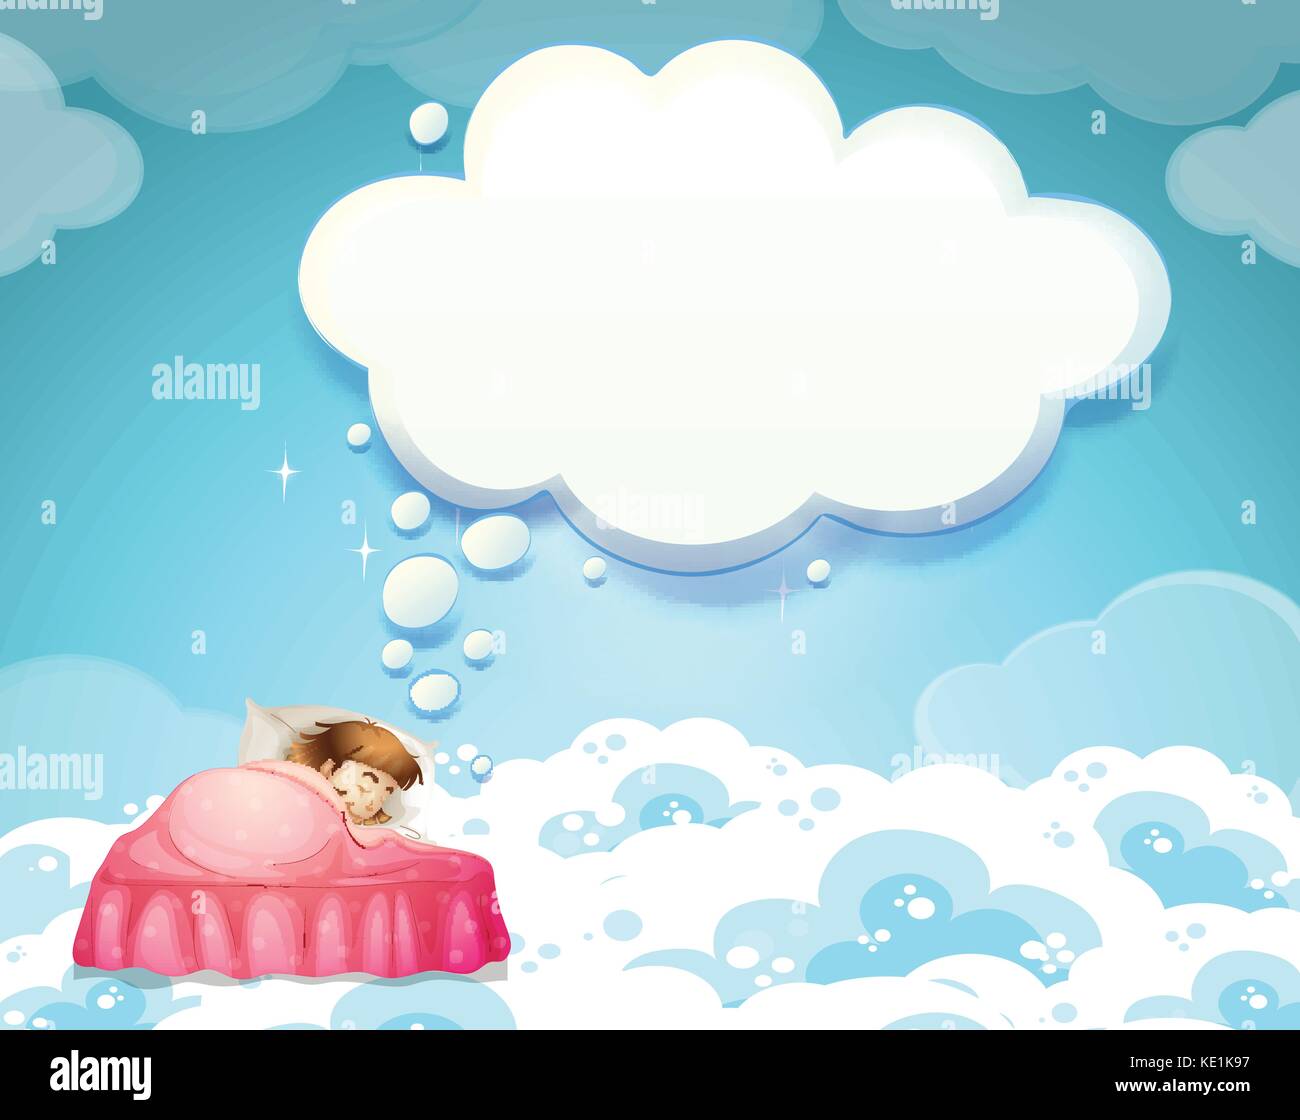 Girl sleeping in bed with clouds background illustration Stock Vector ...